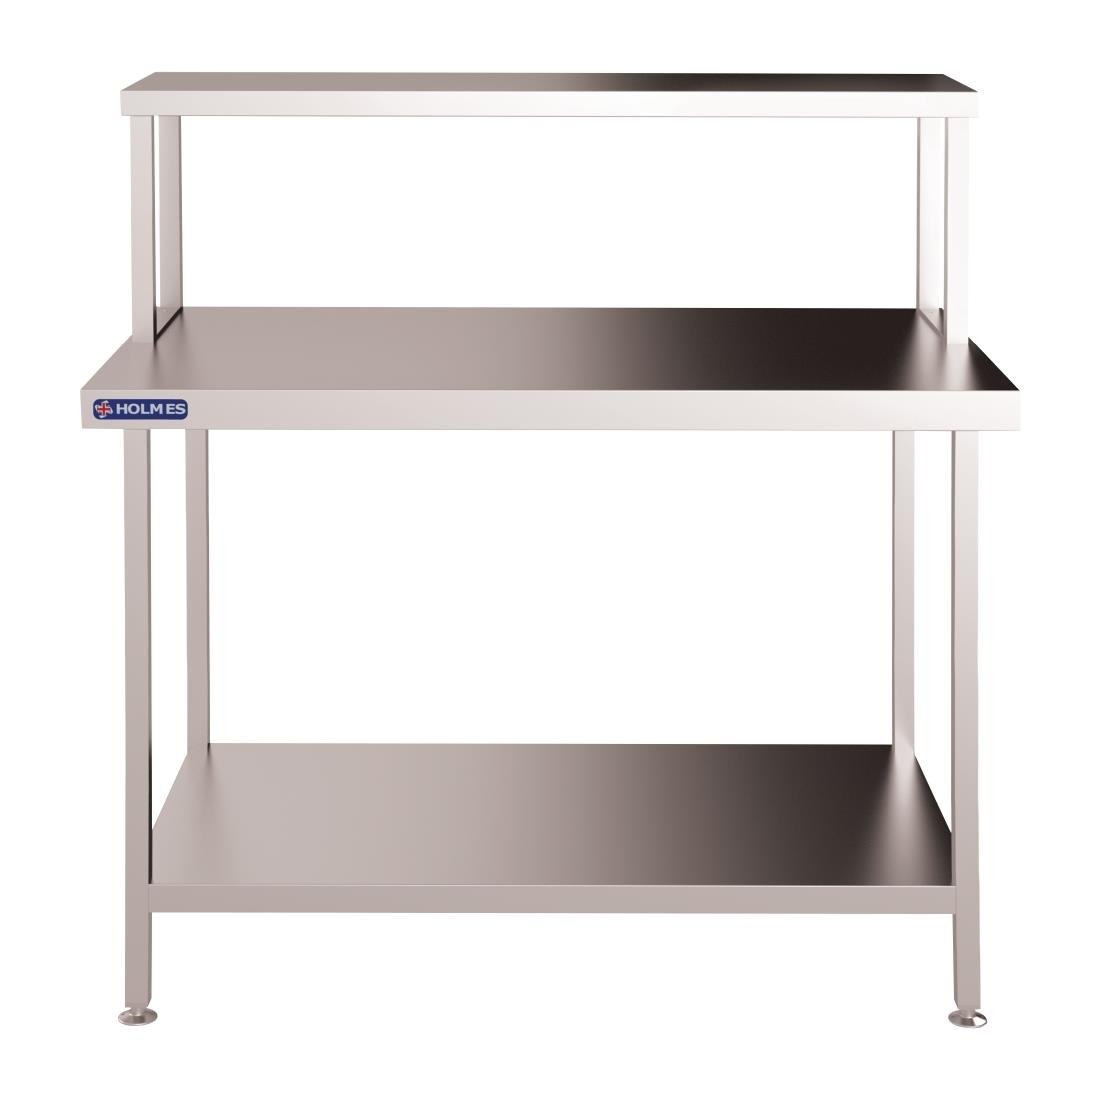 FC448 Holmes Stainless Steel Wall Work Table Welded with Gantry 900mm JD Catering Equipment Solutions Ltd